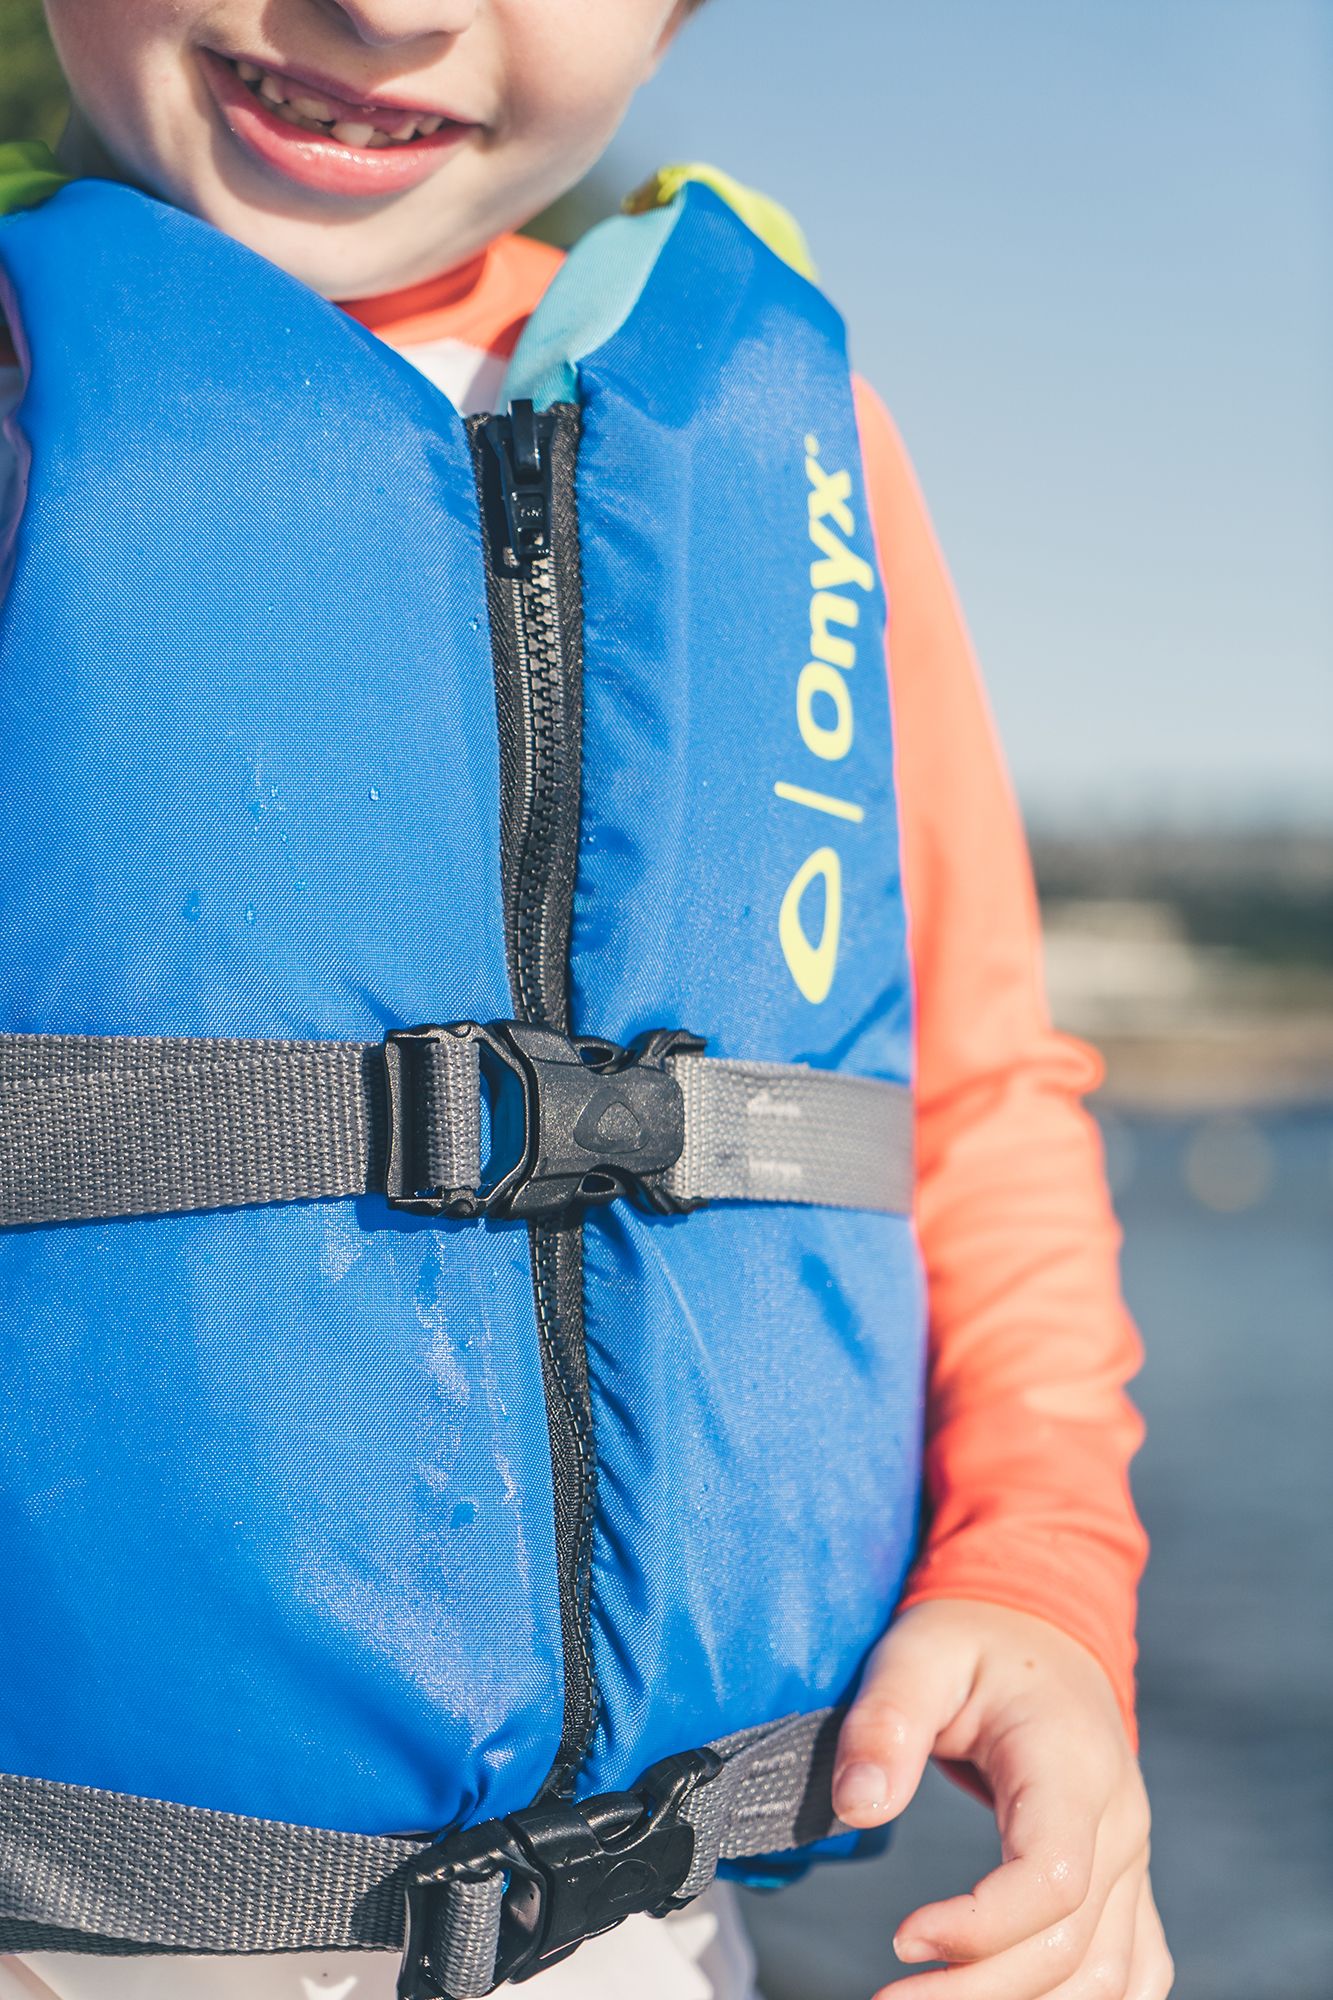 Youth Paddle Vest